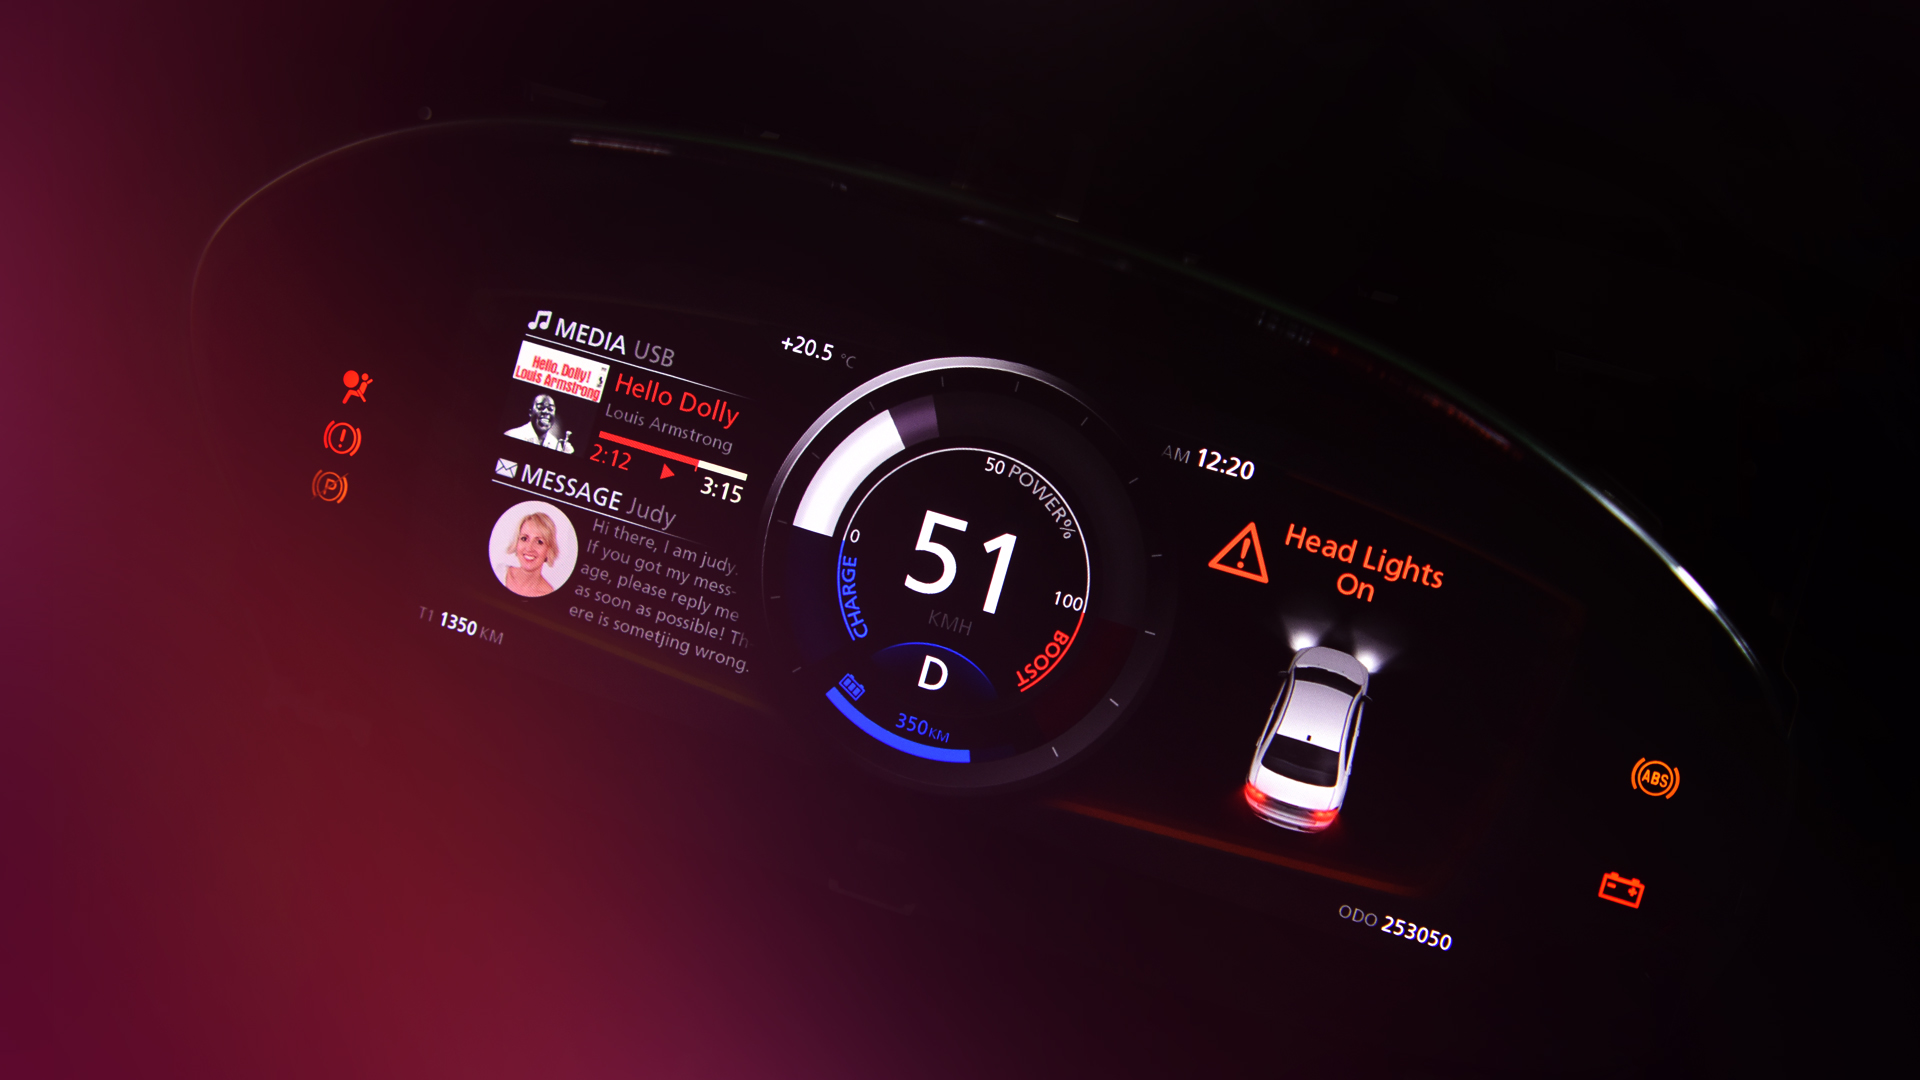 FIC full LCD digital instrument cluster provides a new driving experience